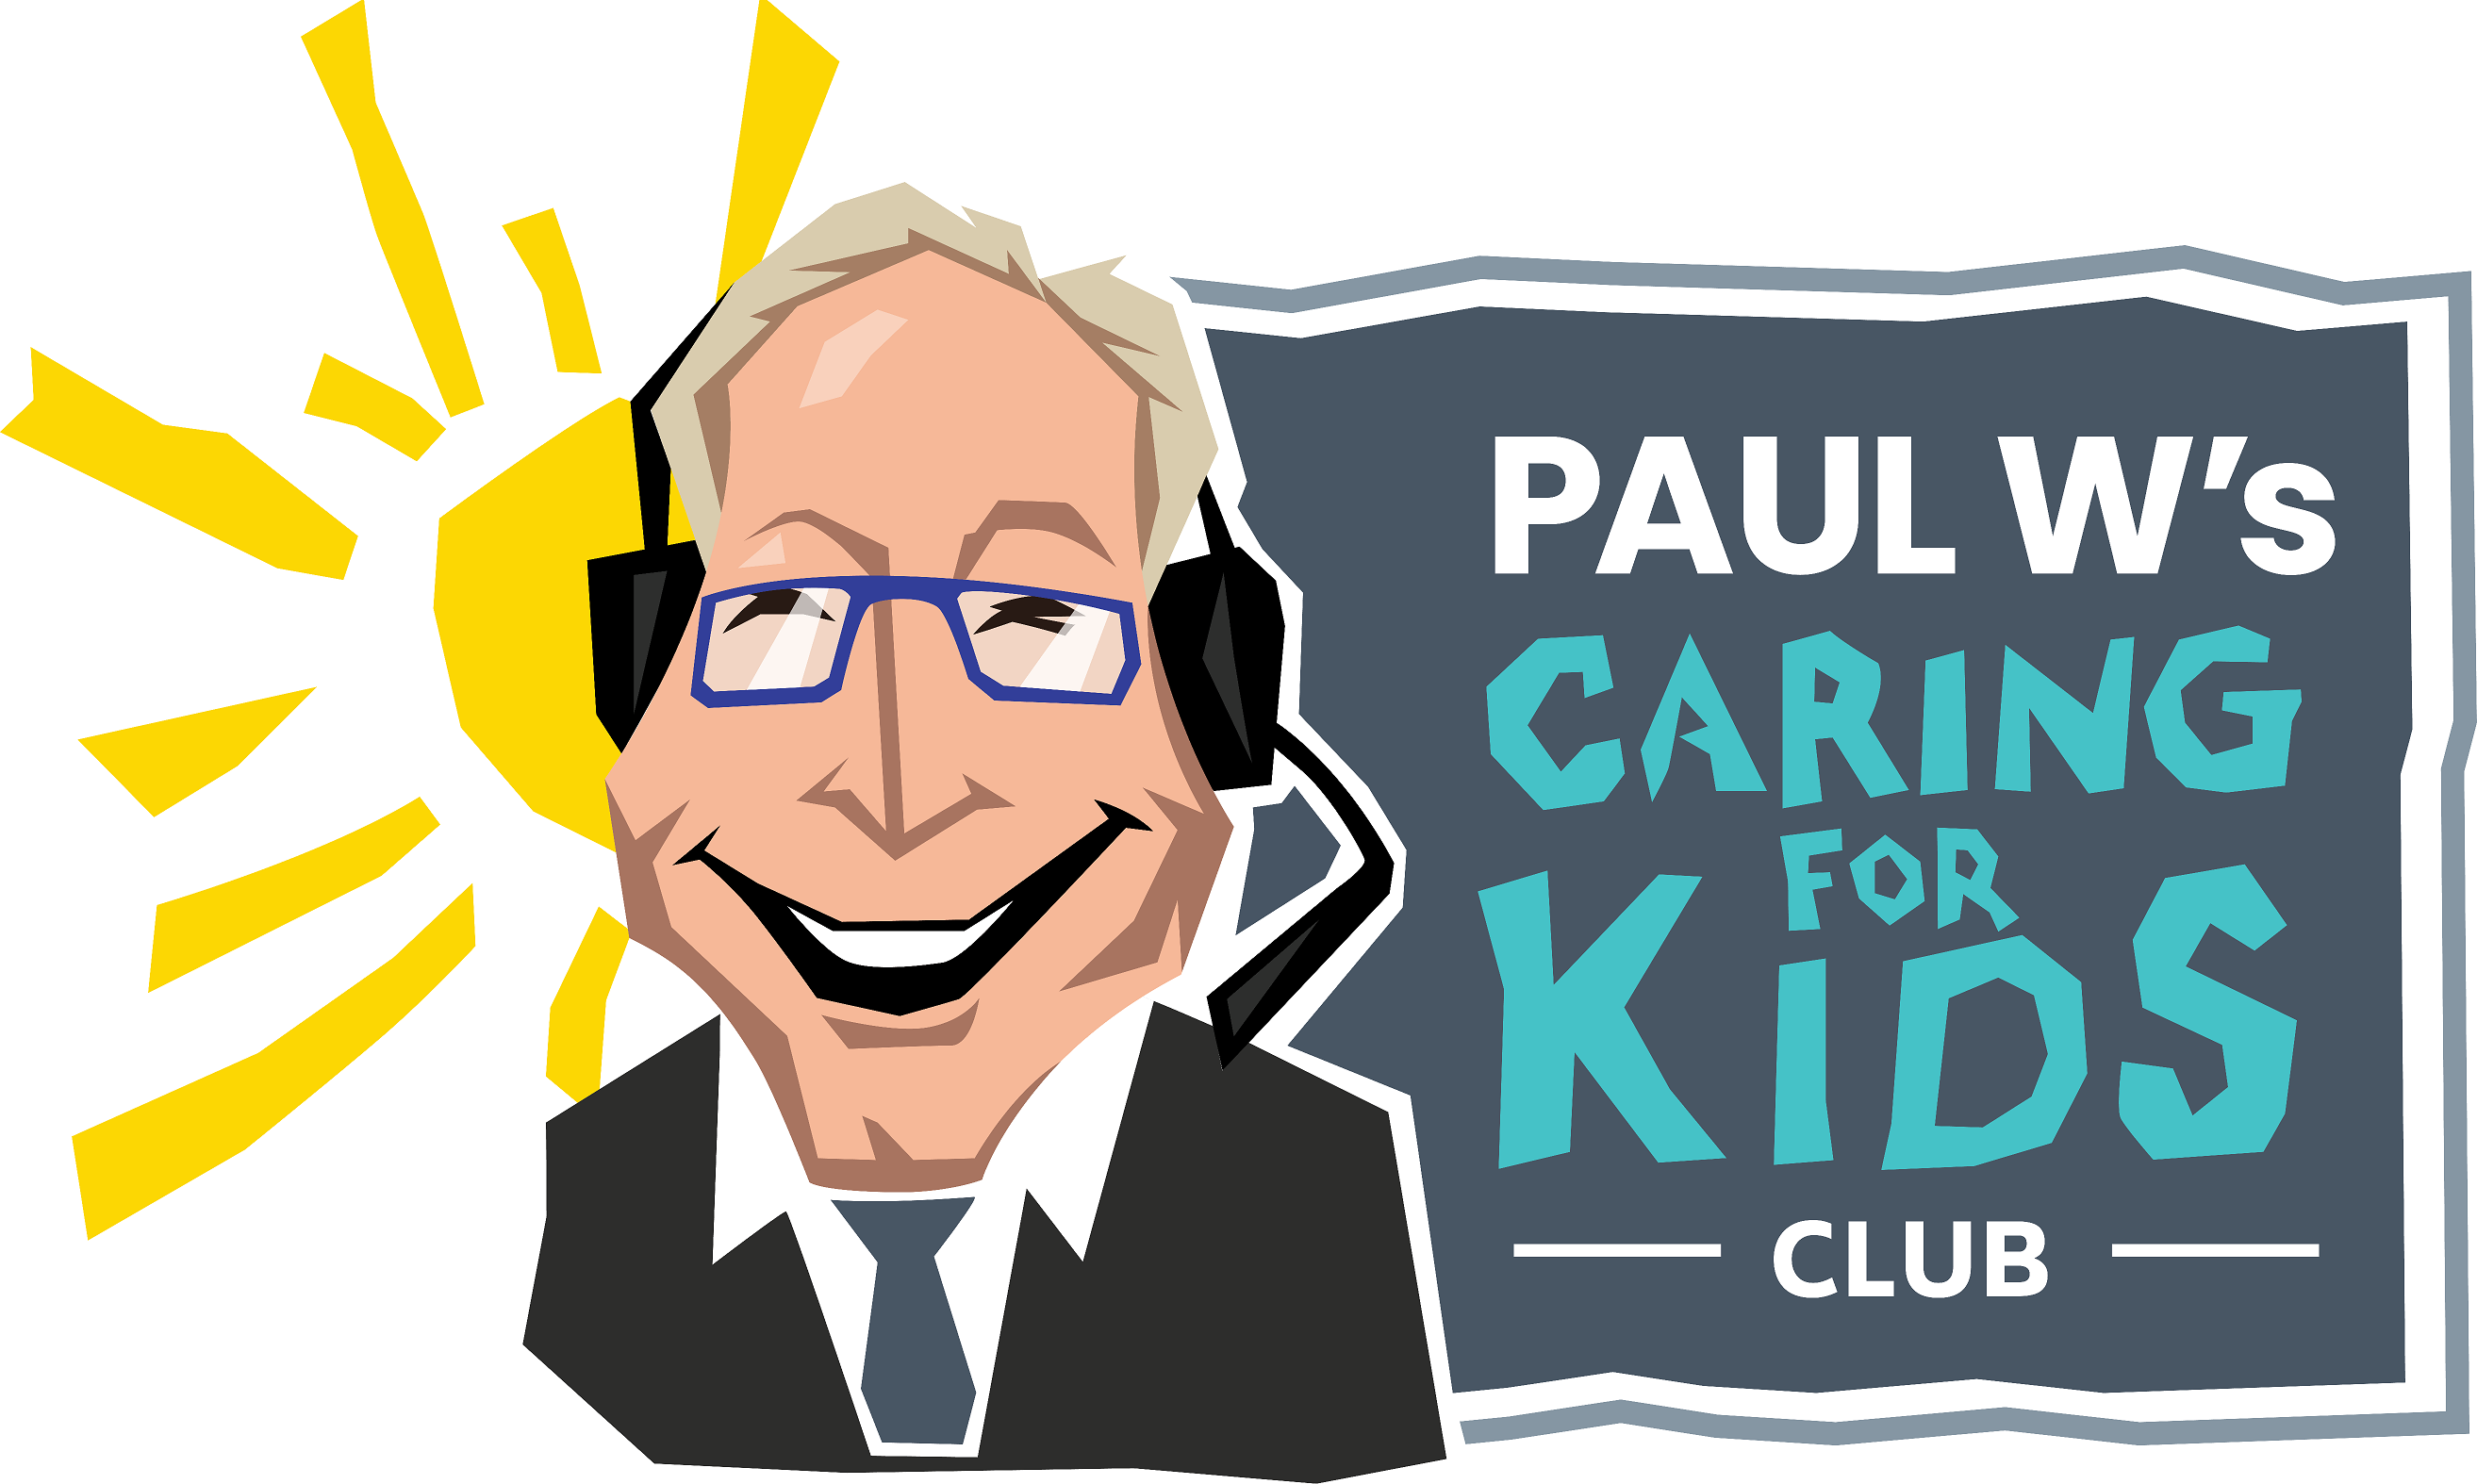 Paul Ws_caring_for_kids_club_logo.png